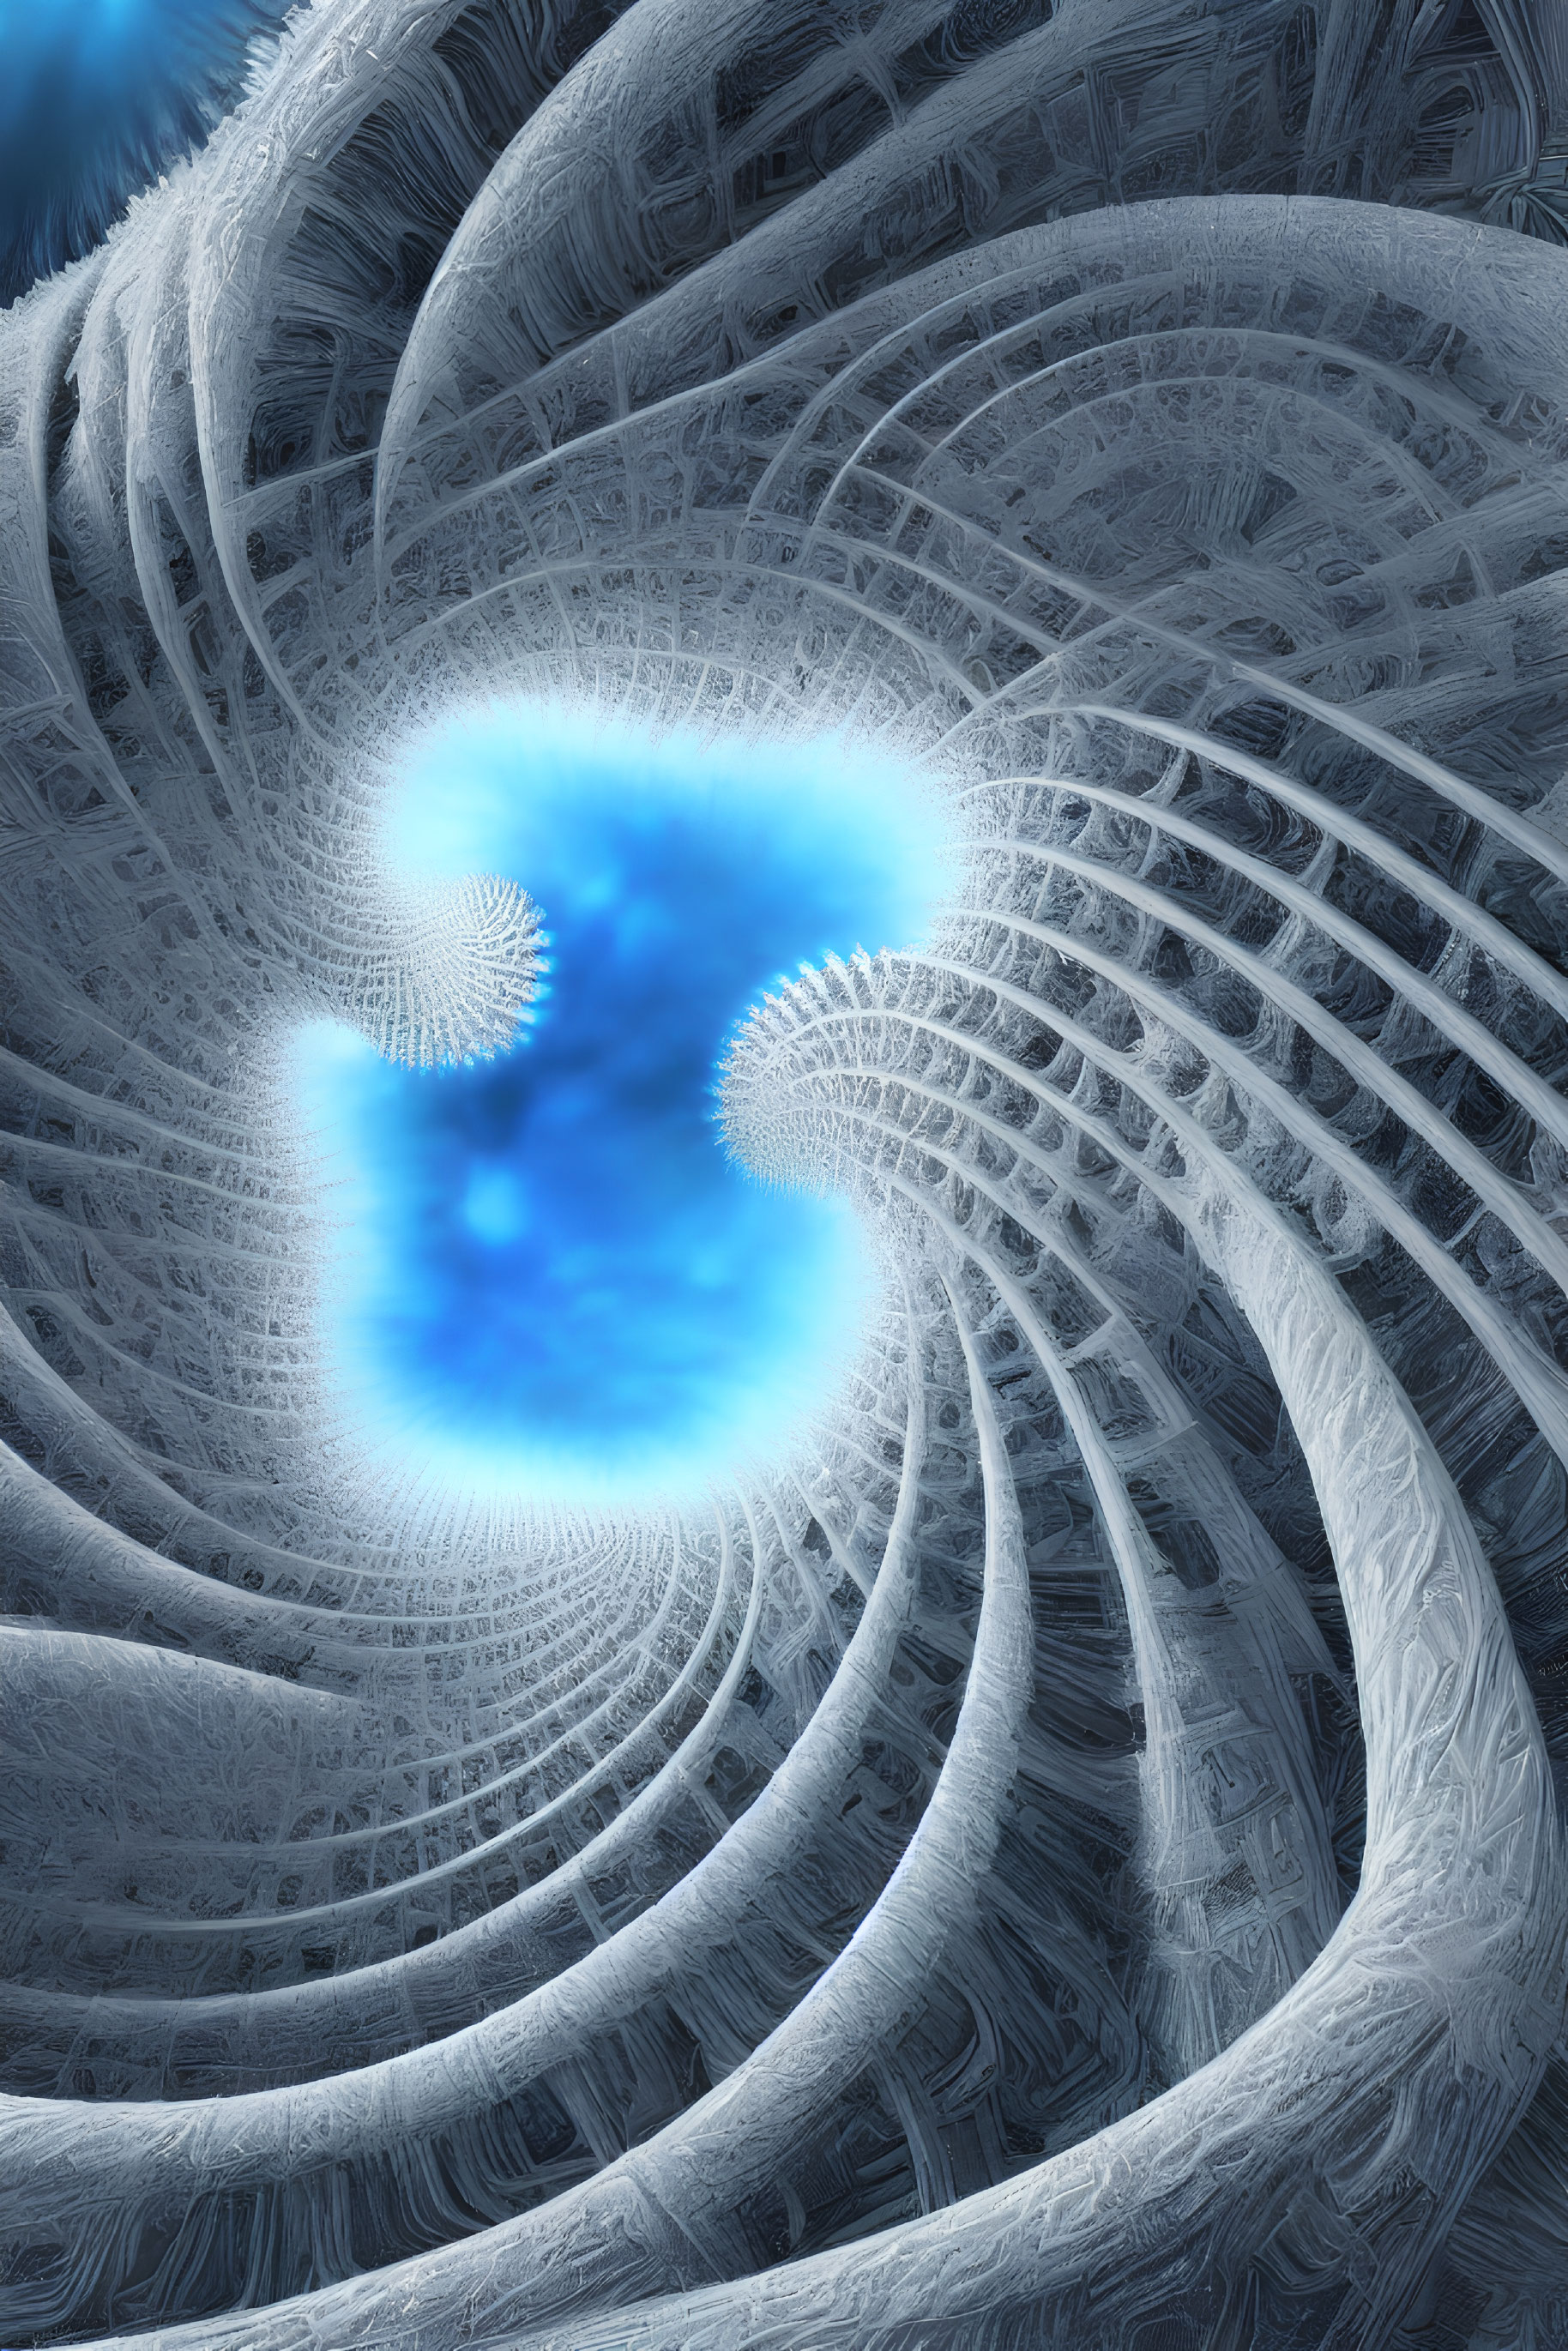 Intricate fractal design with spiraling patterns and glowing blue core